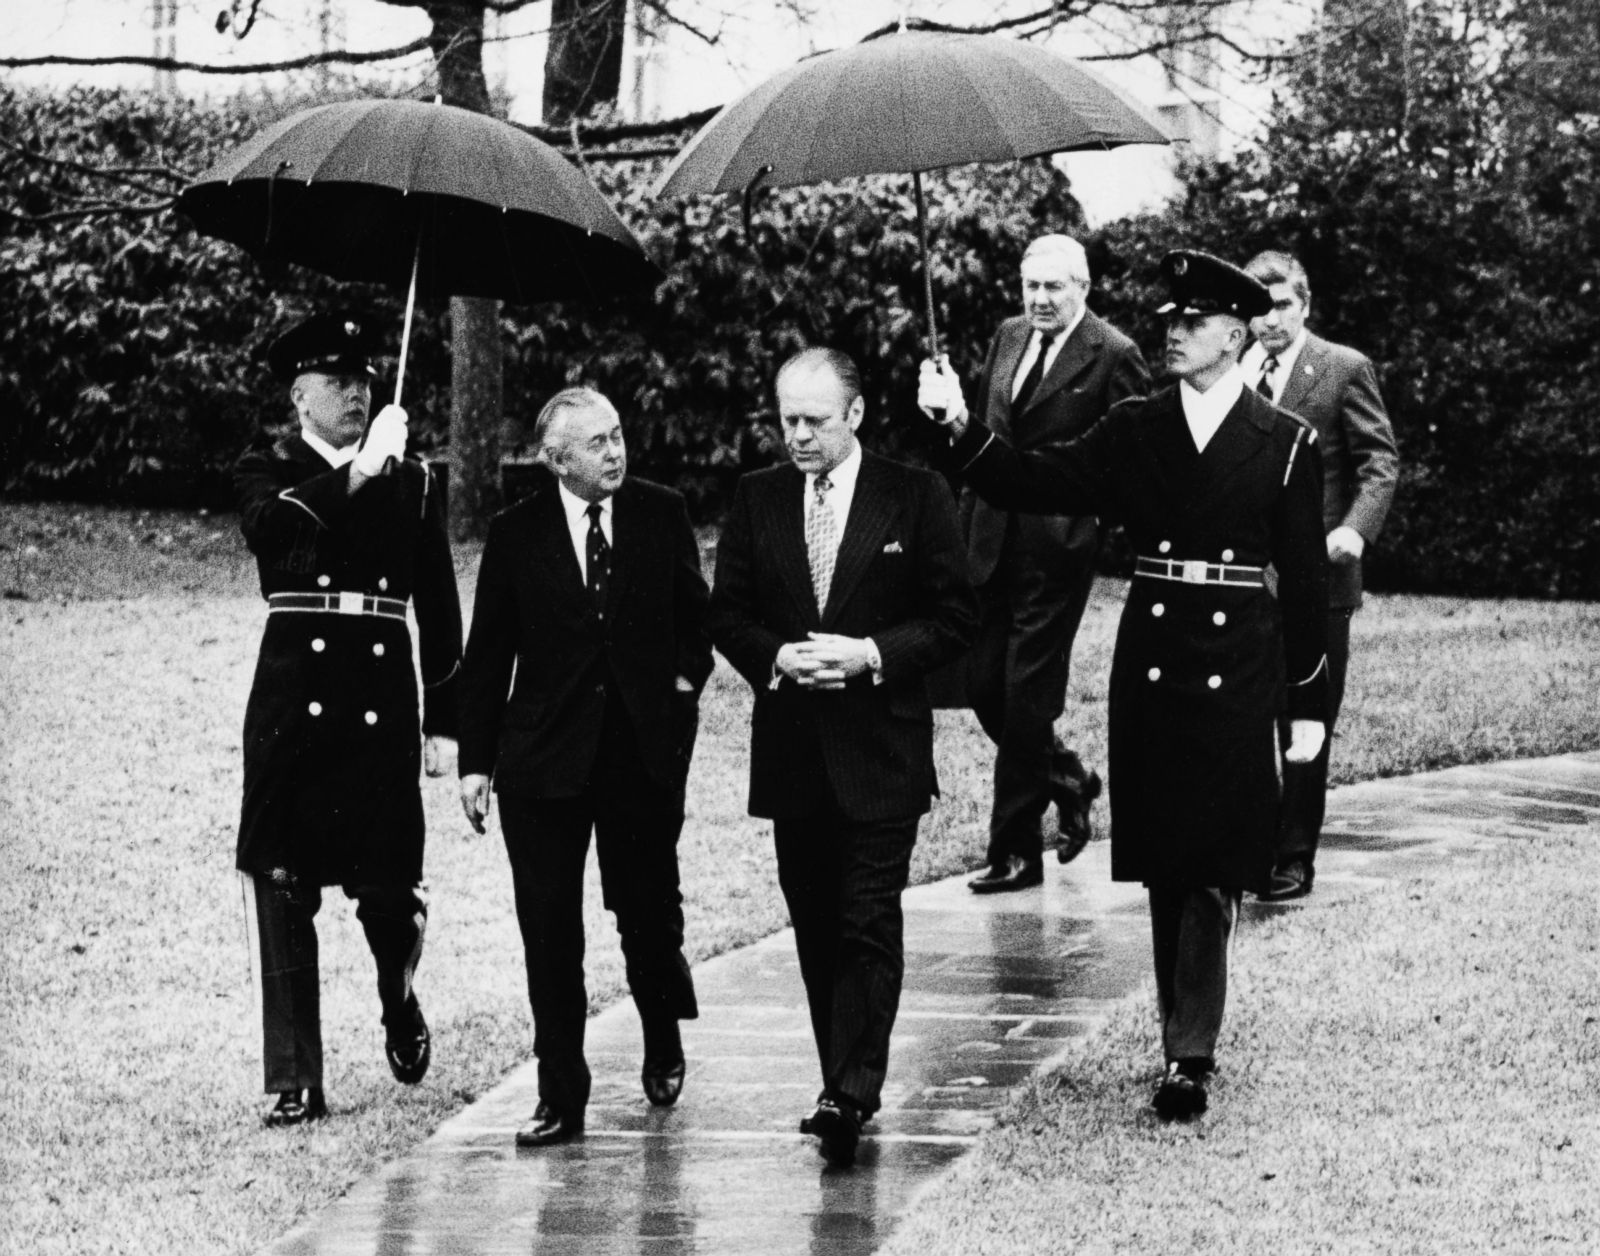 The prime minister and an umbrella